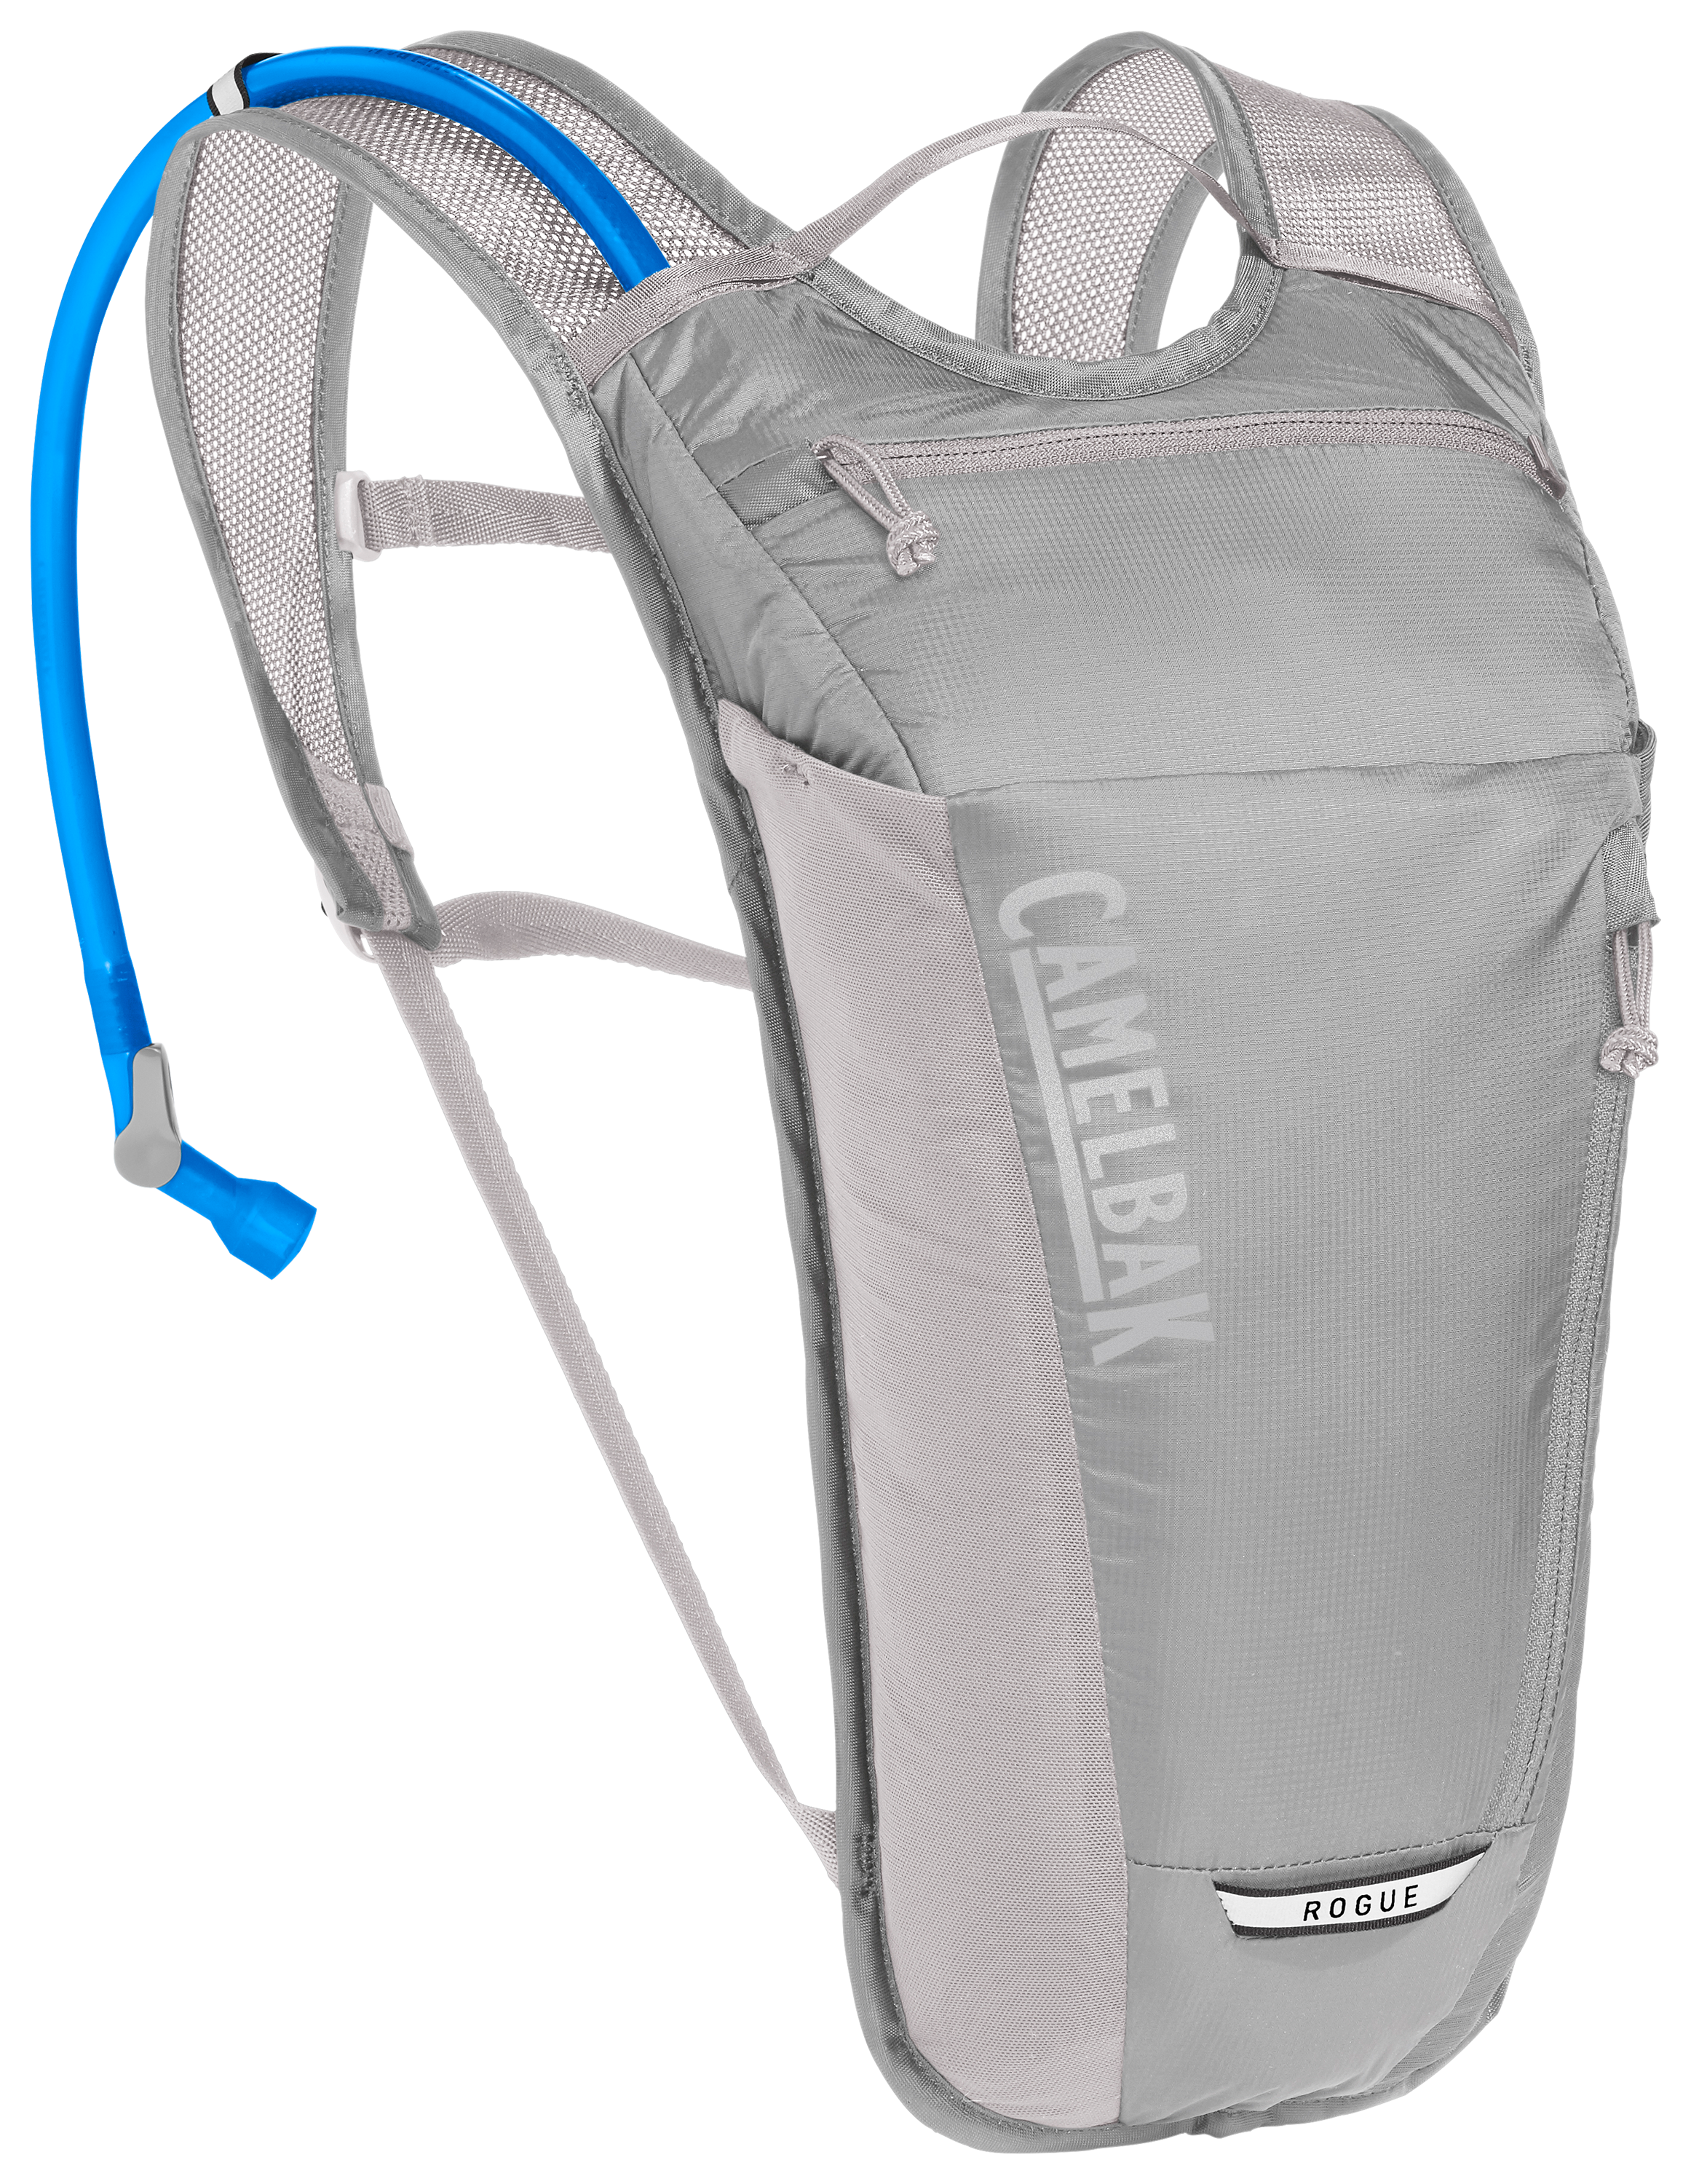 CamelBak Rogue Light 70-oz. Hydration Pack - Drizzle Grey